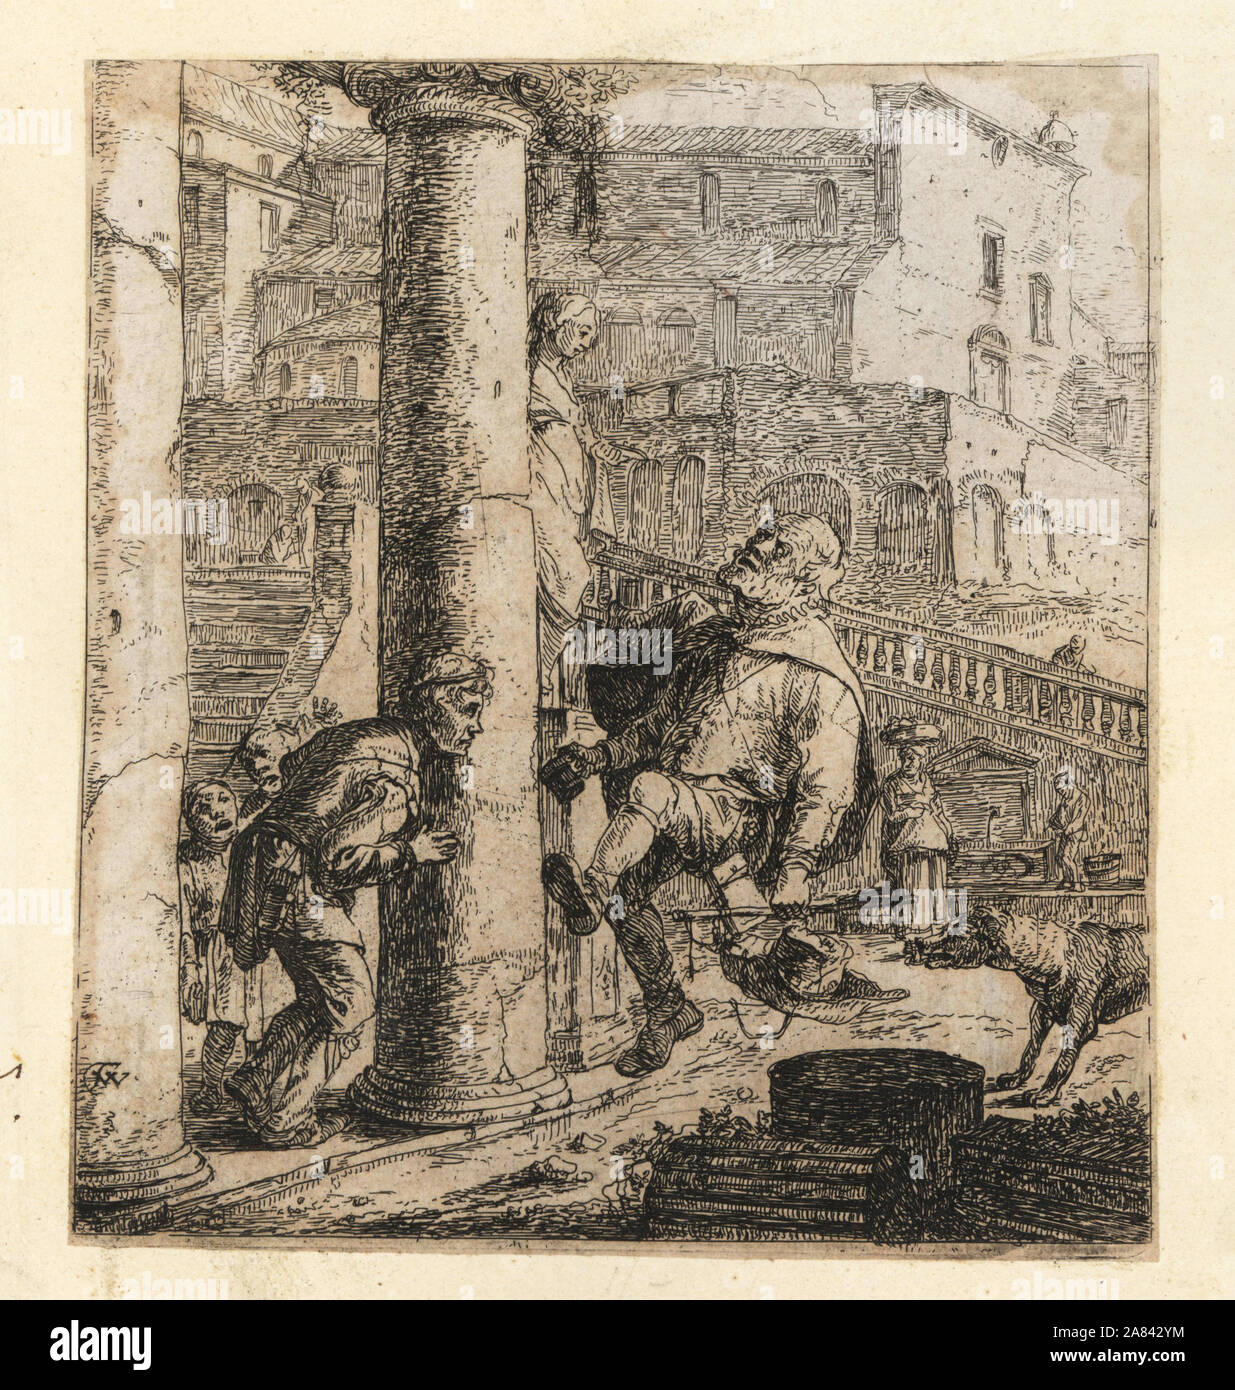 Lazarillo de Tormes takes his revenge on the blind beggar by forcing him to bump into a pillar. Church of Santa Maria in Aracoeli in the background. Copperplate engraving by Thomas Wijck from The Life of Lazarillo de Tormes and of His Fortunes and Adversities, 1631. Stock Photo